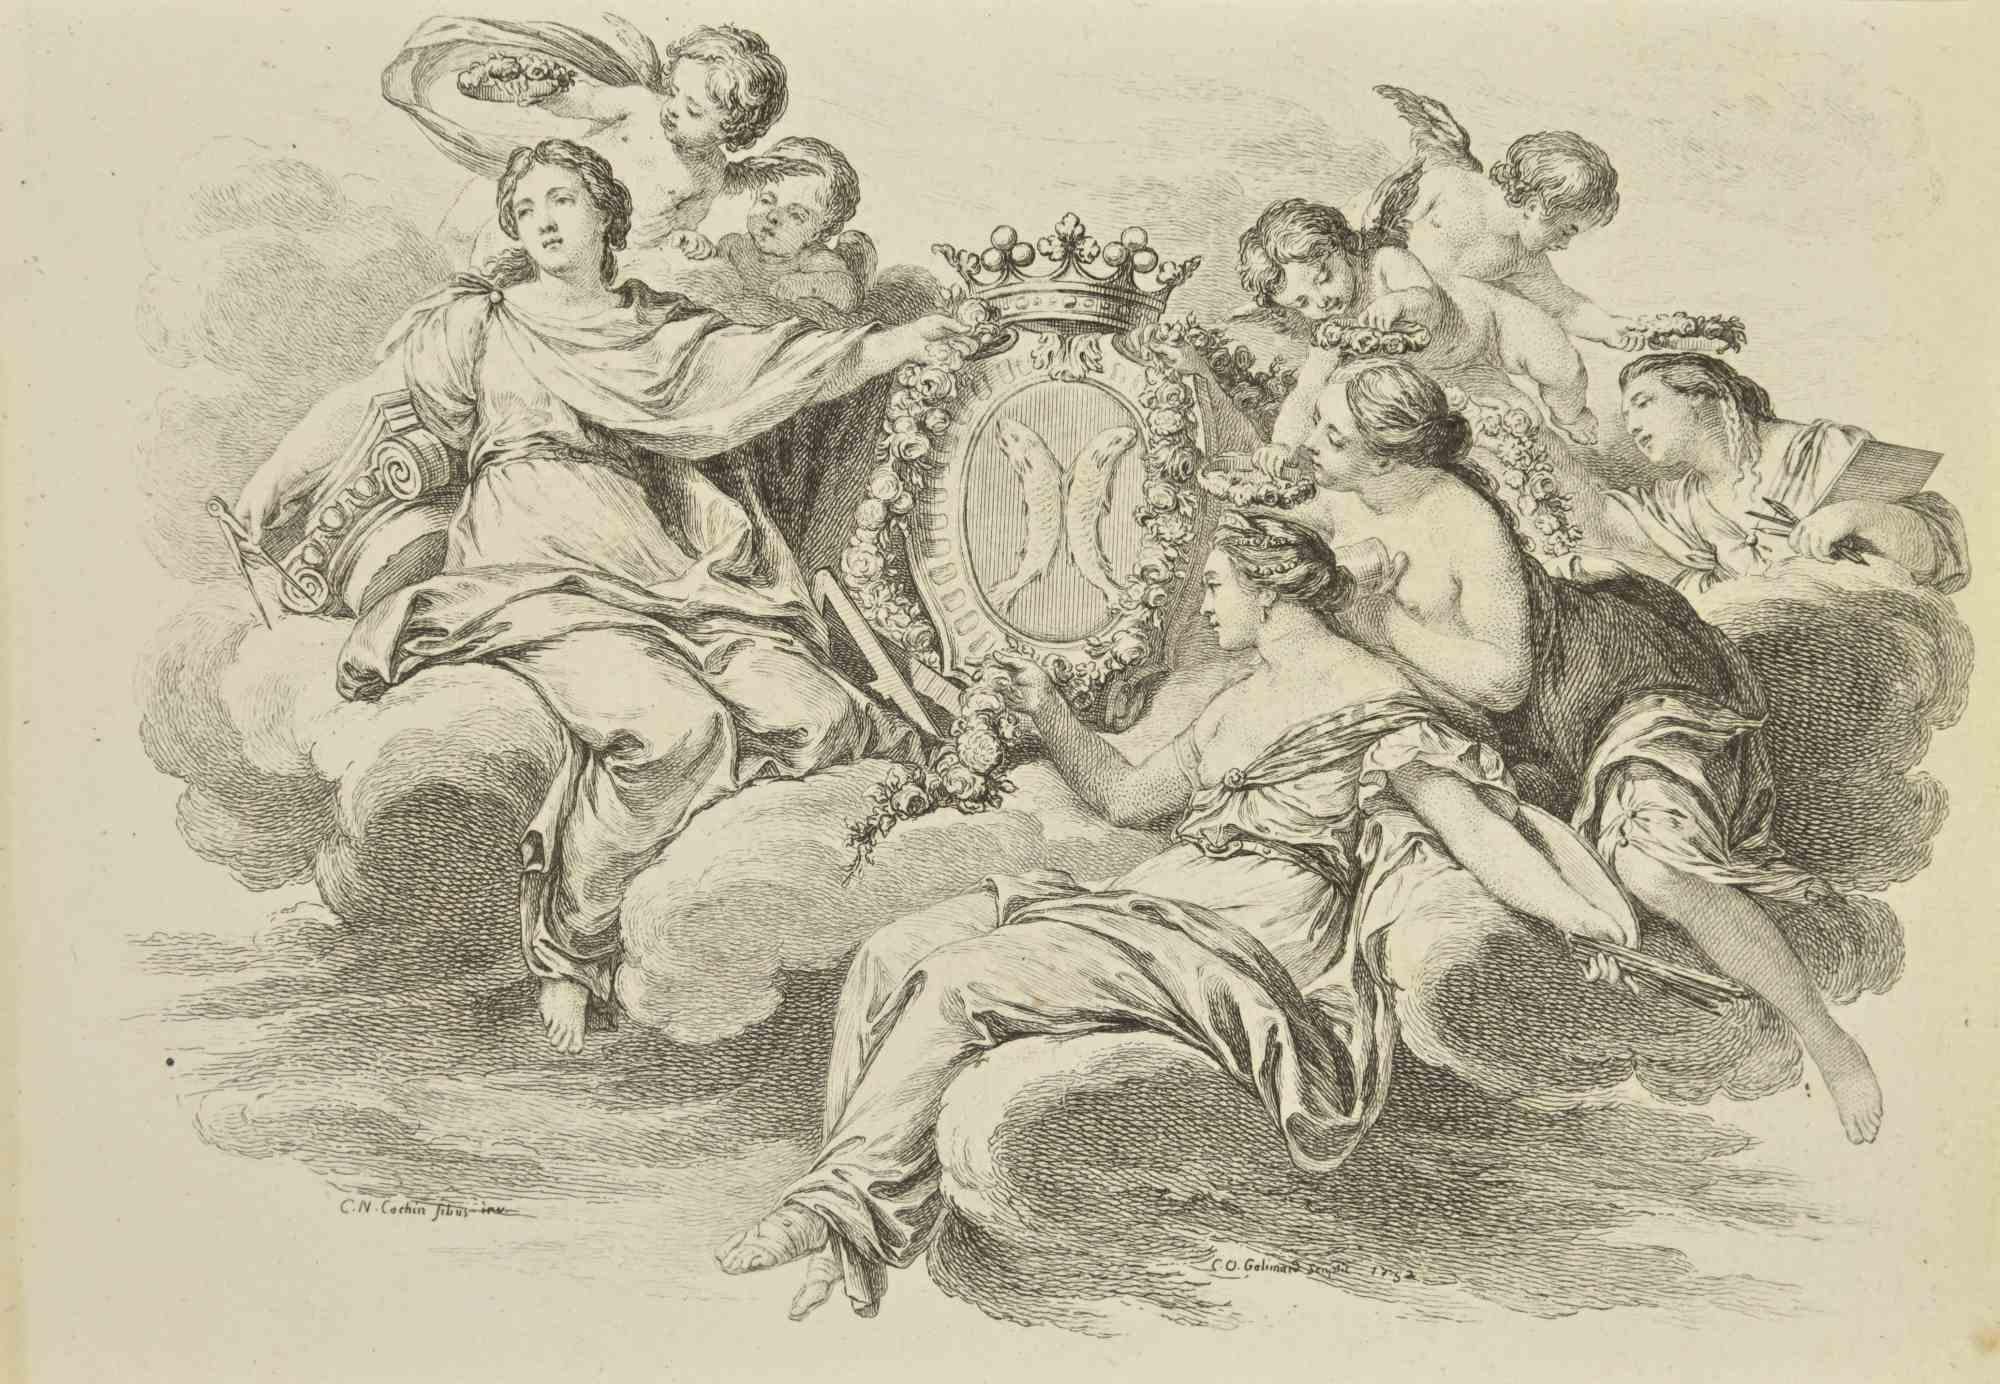 Gathering is an etching realized by Nicholas Cochin in 1755.

Signed on the plate.

Good conditions.

The artwork is depicted through confident strokes.